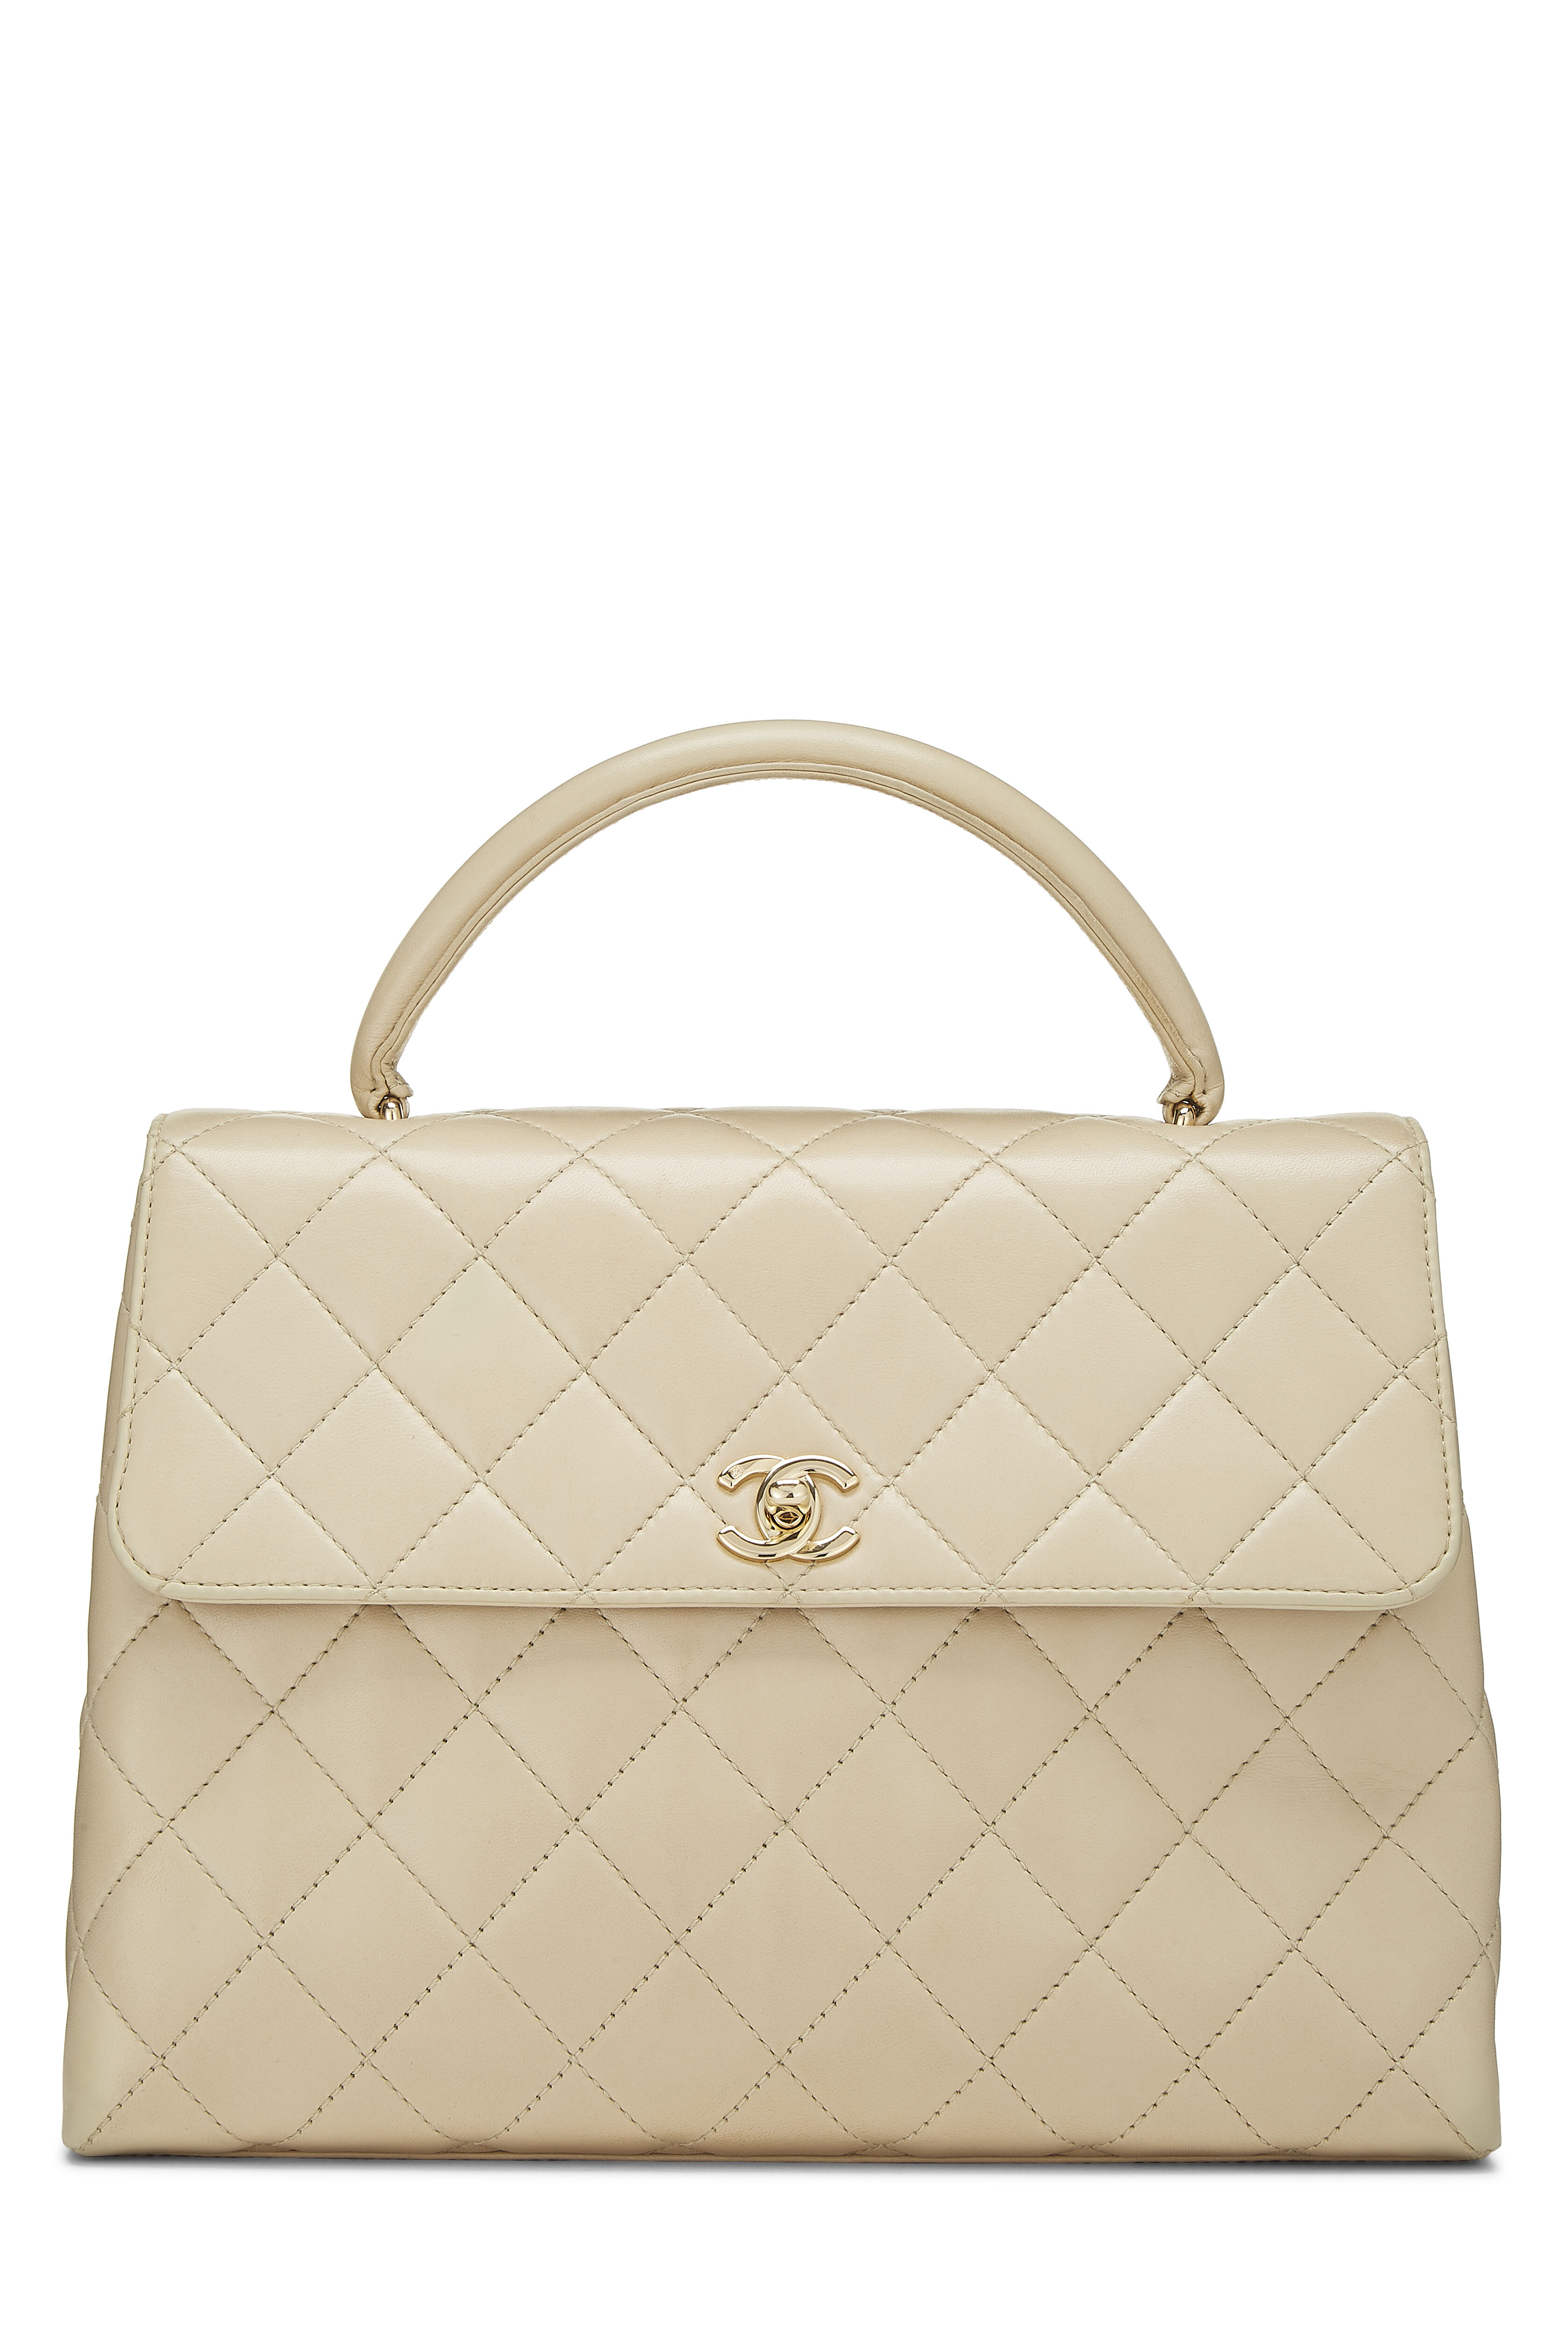 Money-Wise MarketChanel Vintage Quilted Kelly Top Handle Bag